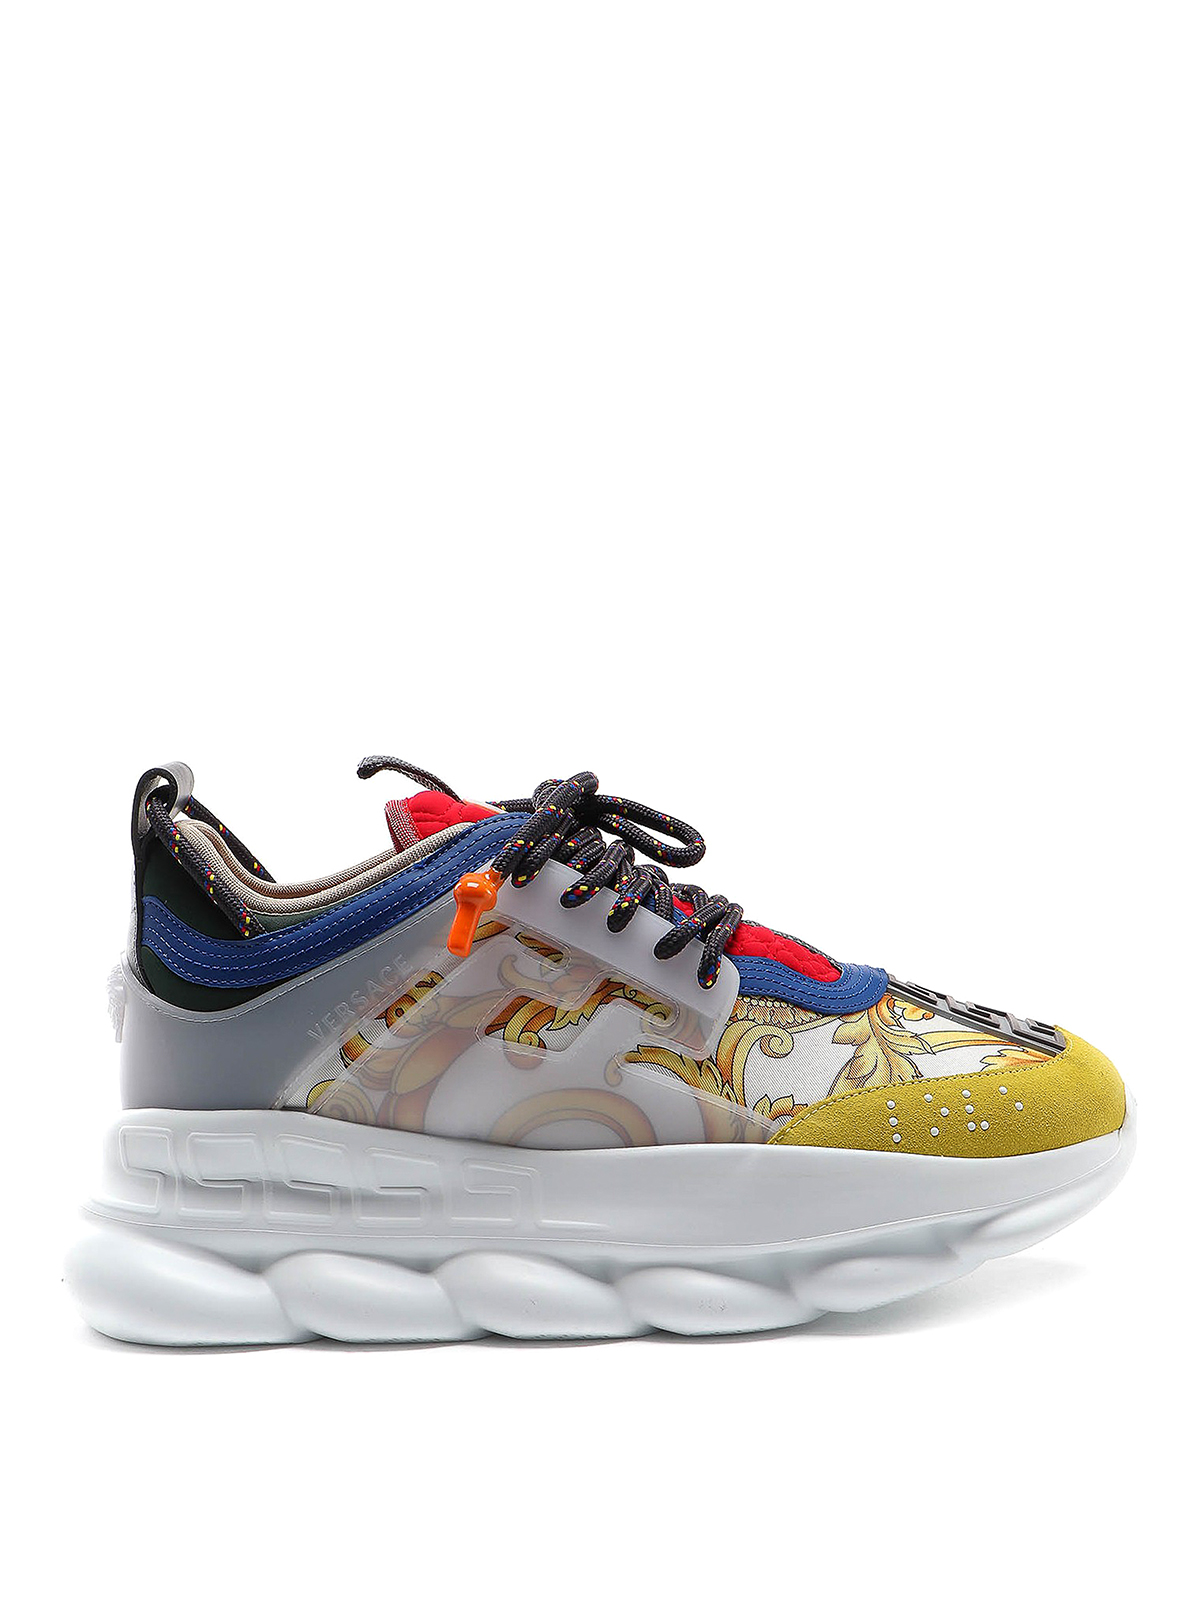 Versace Chain Reaction Sneakers